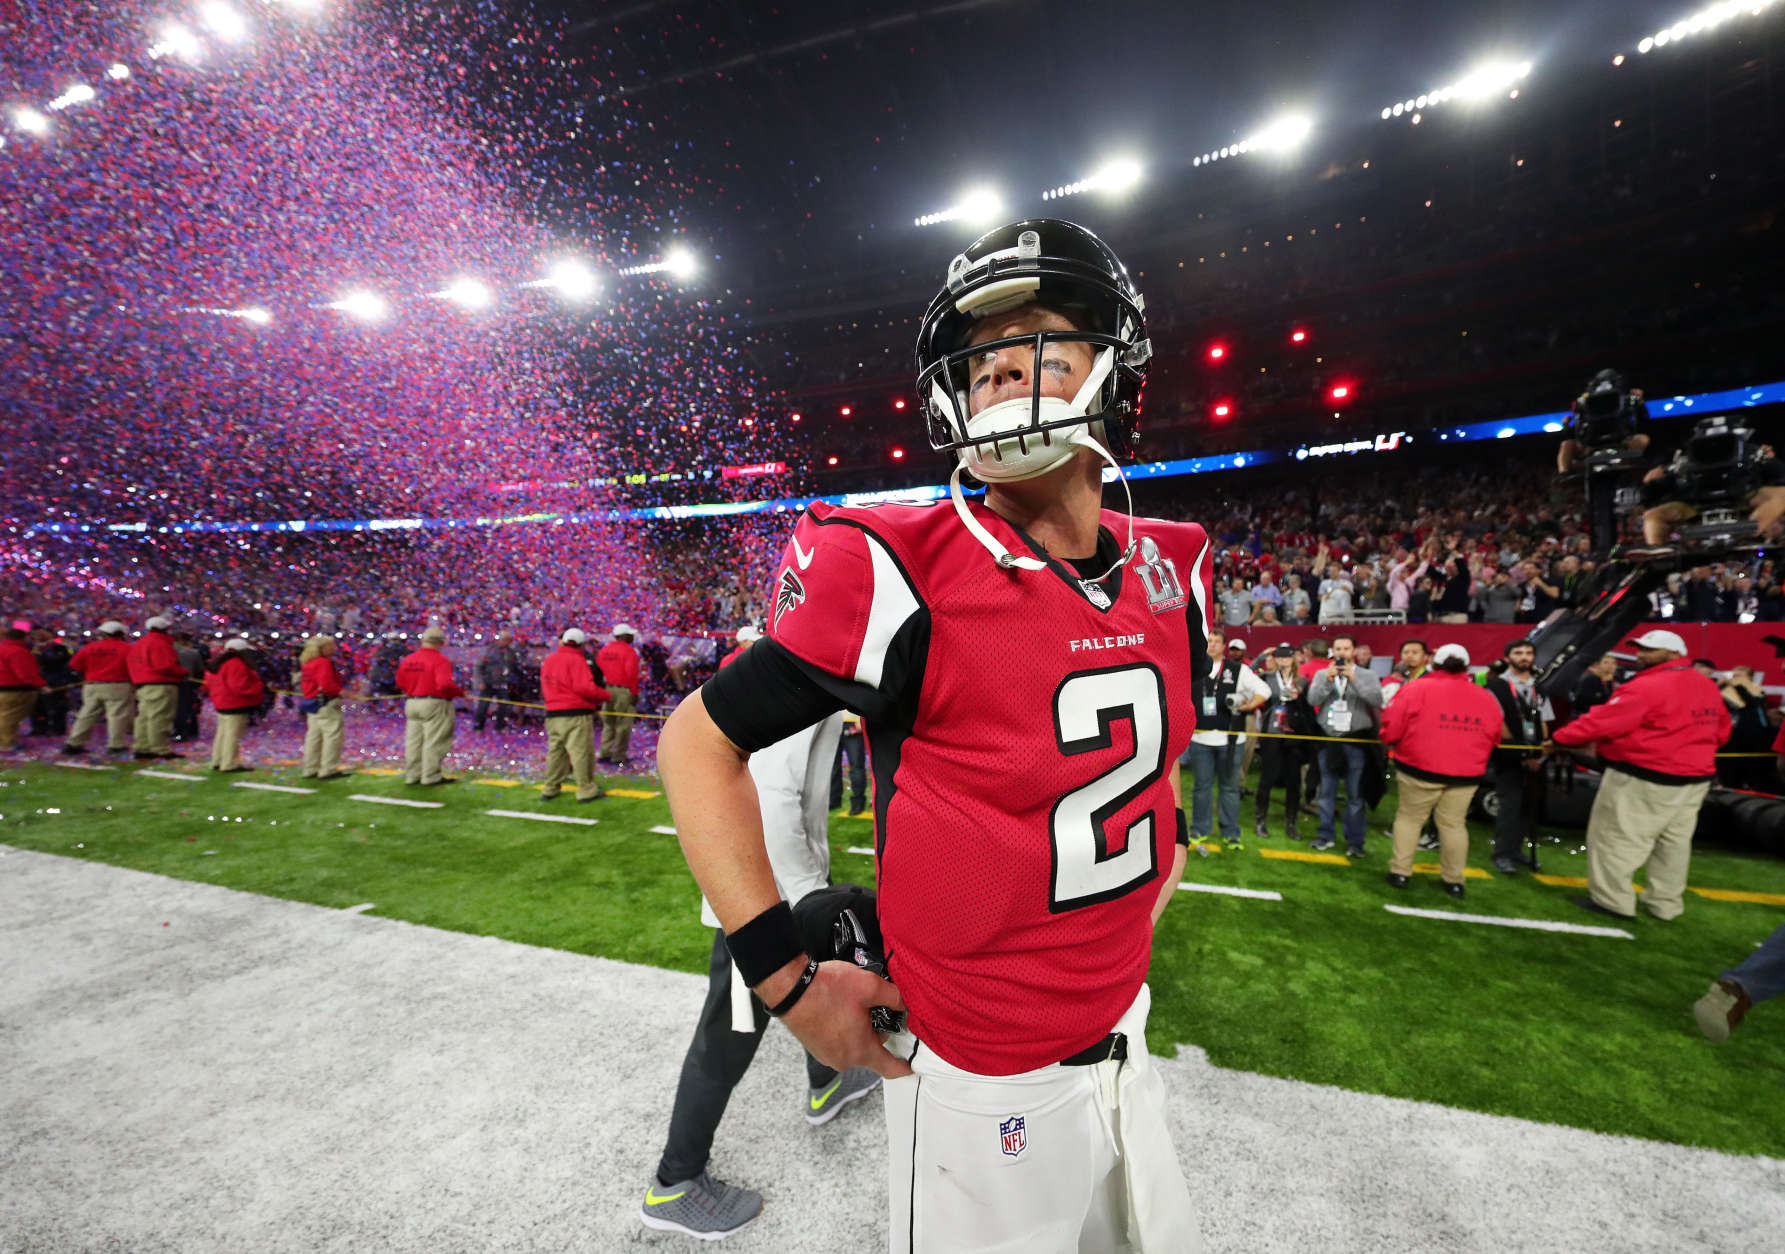 HOUSTON, TX - FEBRUARY 05:  Matt Ryan #2 of the Atlanta Falcons walks off the field after losing 34-28 to the New England Patriots during Super Bowl 51 at NRG Stadium on February 5, 2017 in Houston, Texas.  (Photo by Tom Pennington/Getty Images)